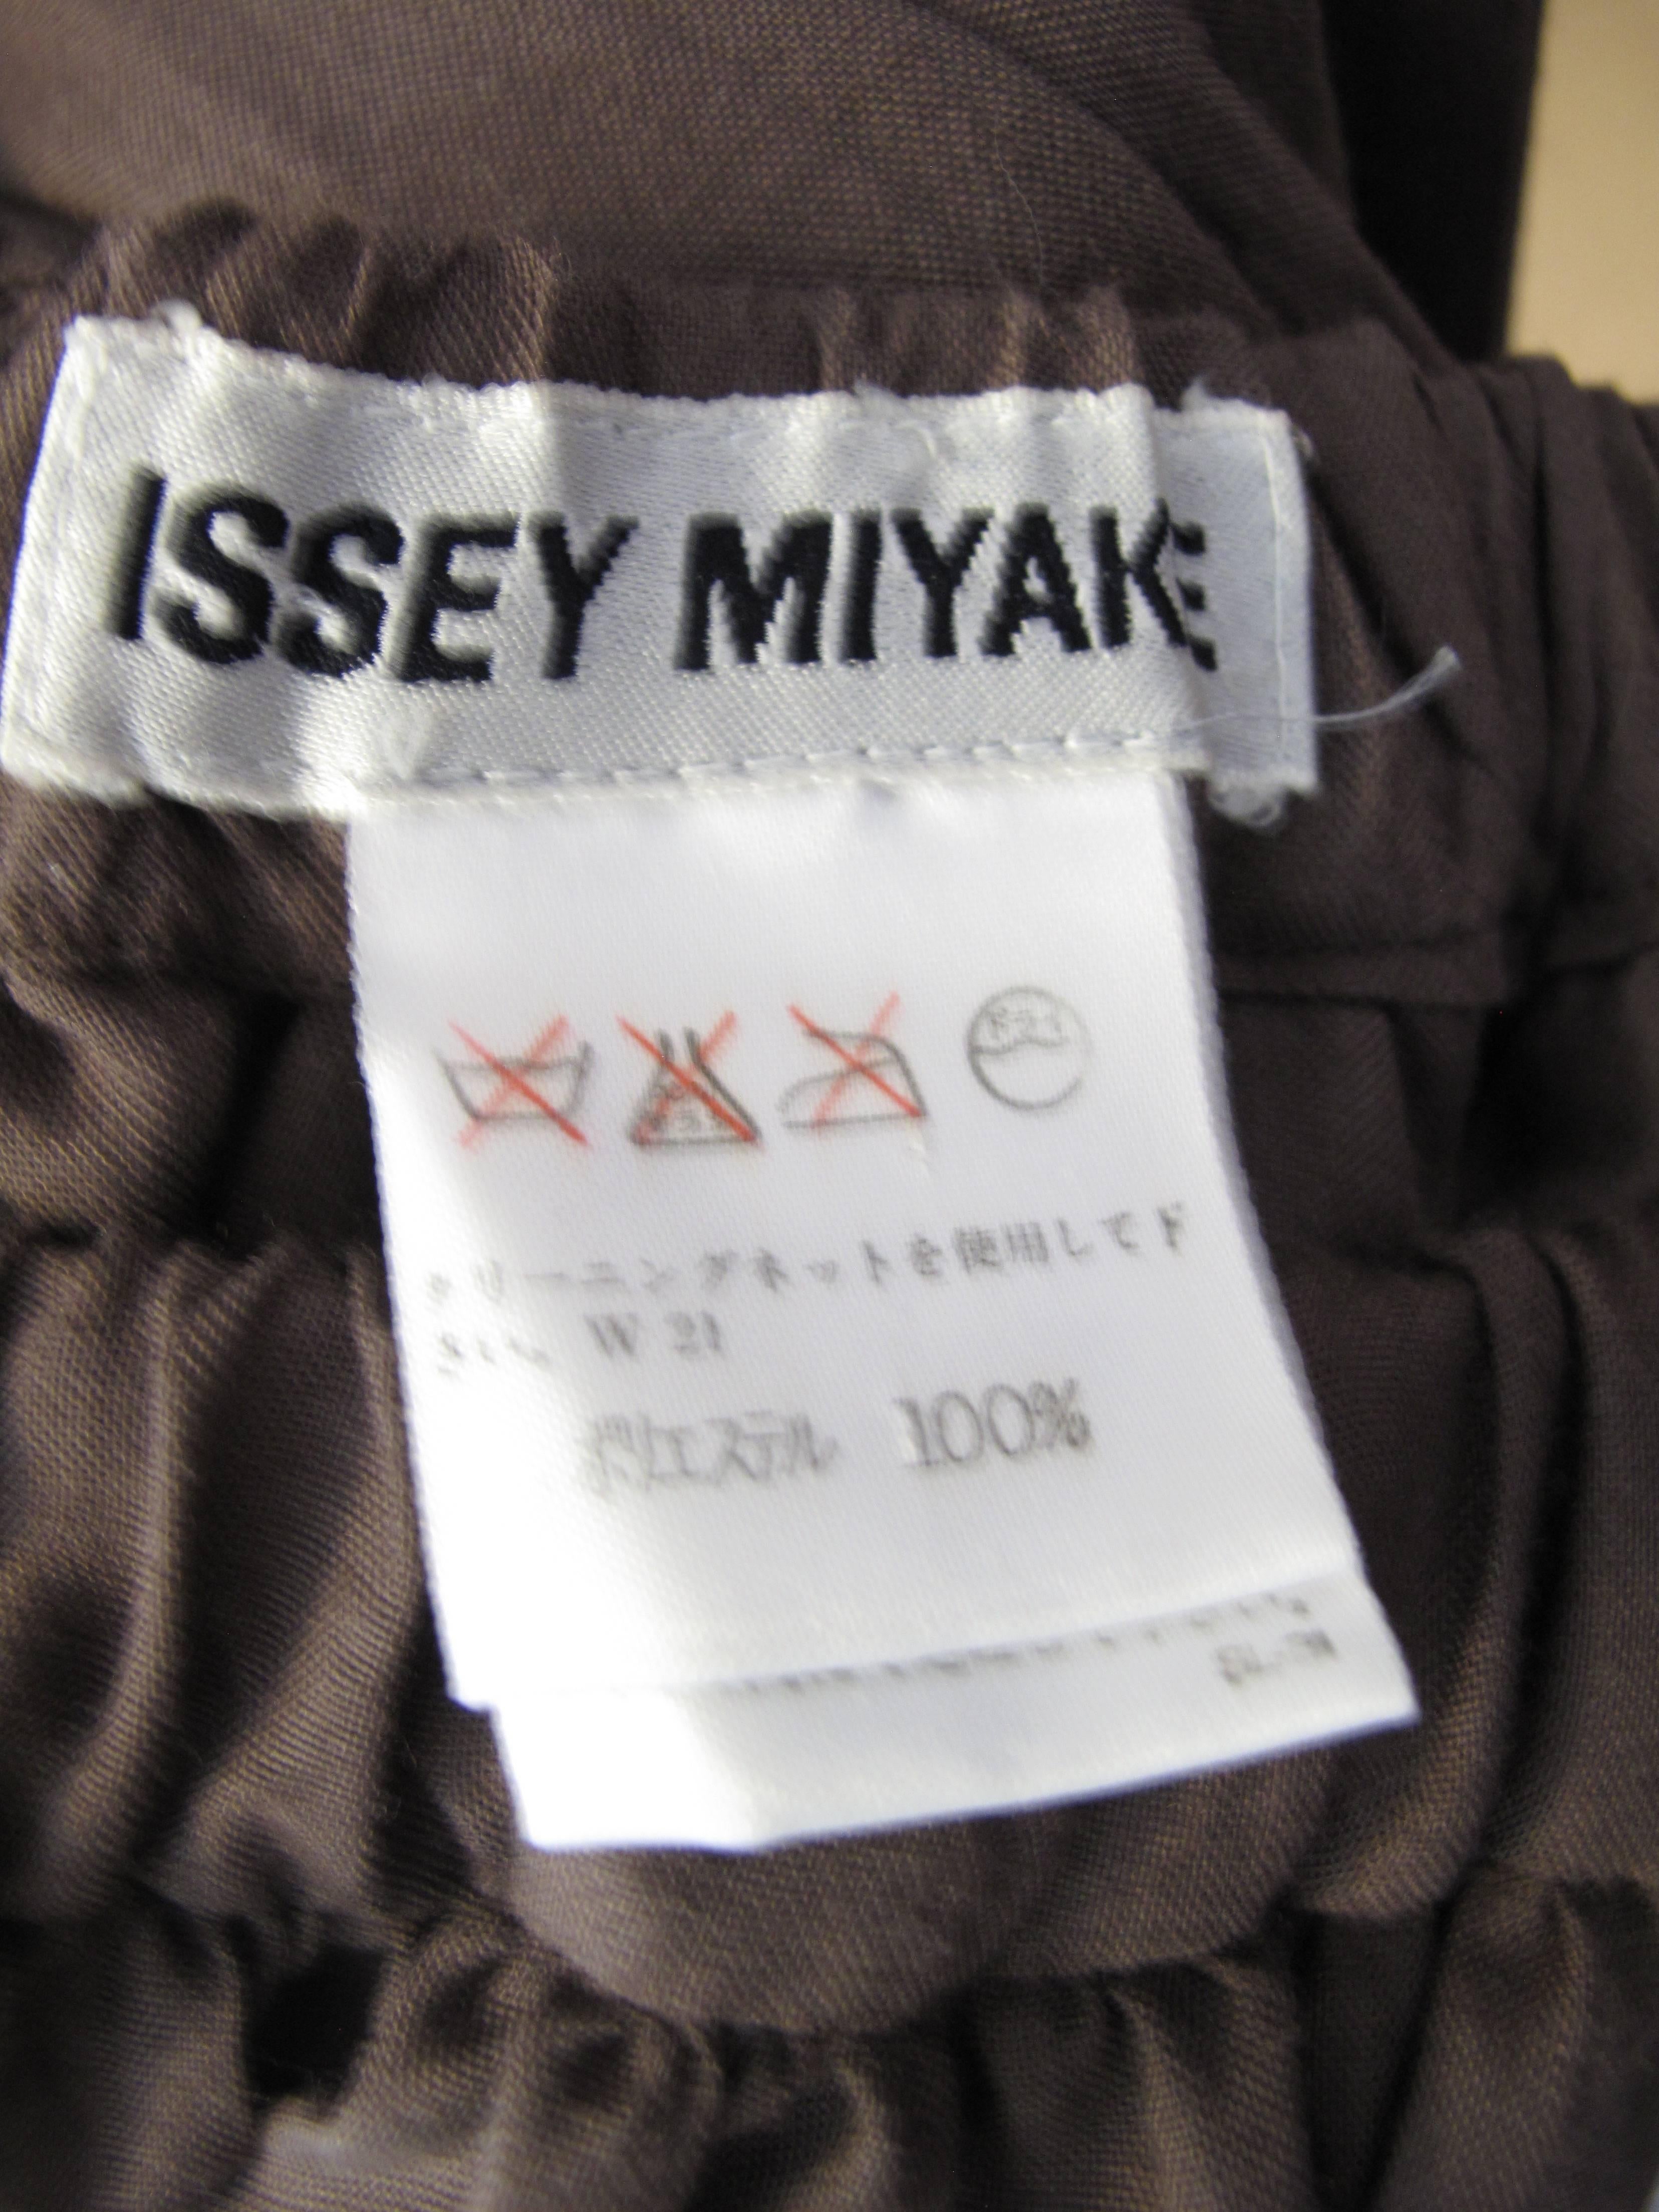 Issey Miyake cotton pleated skirt with elastic waist.  Condition: Excellent. Size Medium

We accept returns for refund, please see our terms.  We offer free ground shipping within the US. Please let us know if you have any questions.